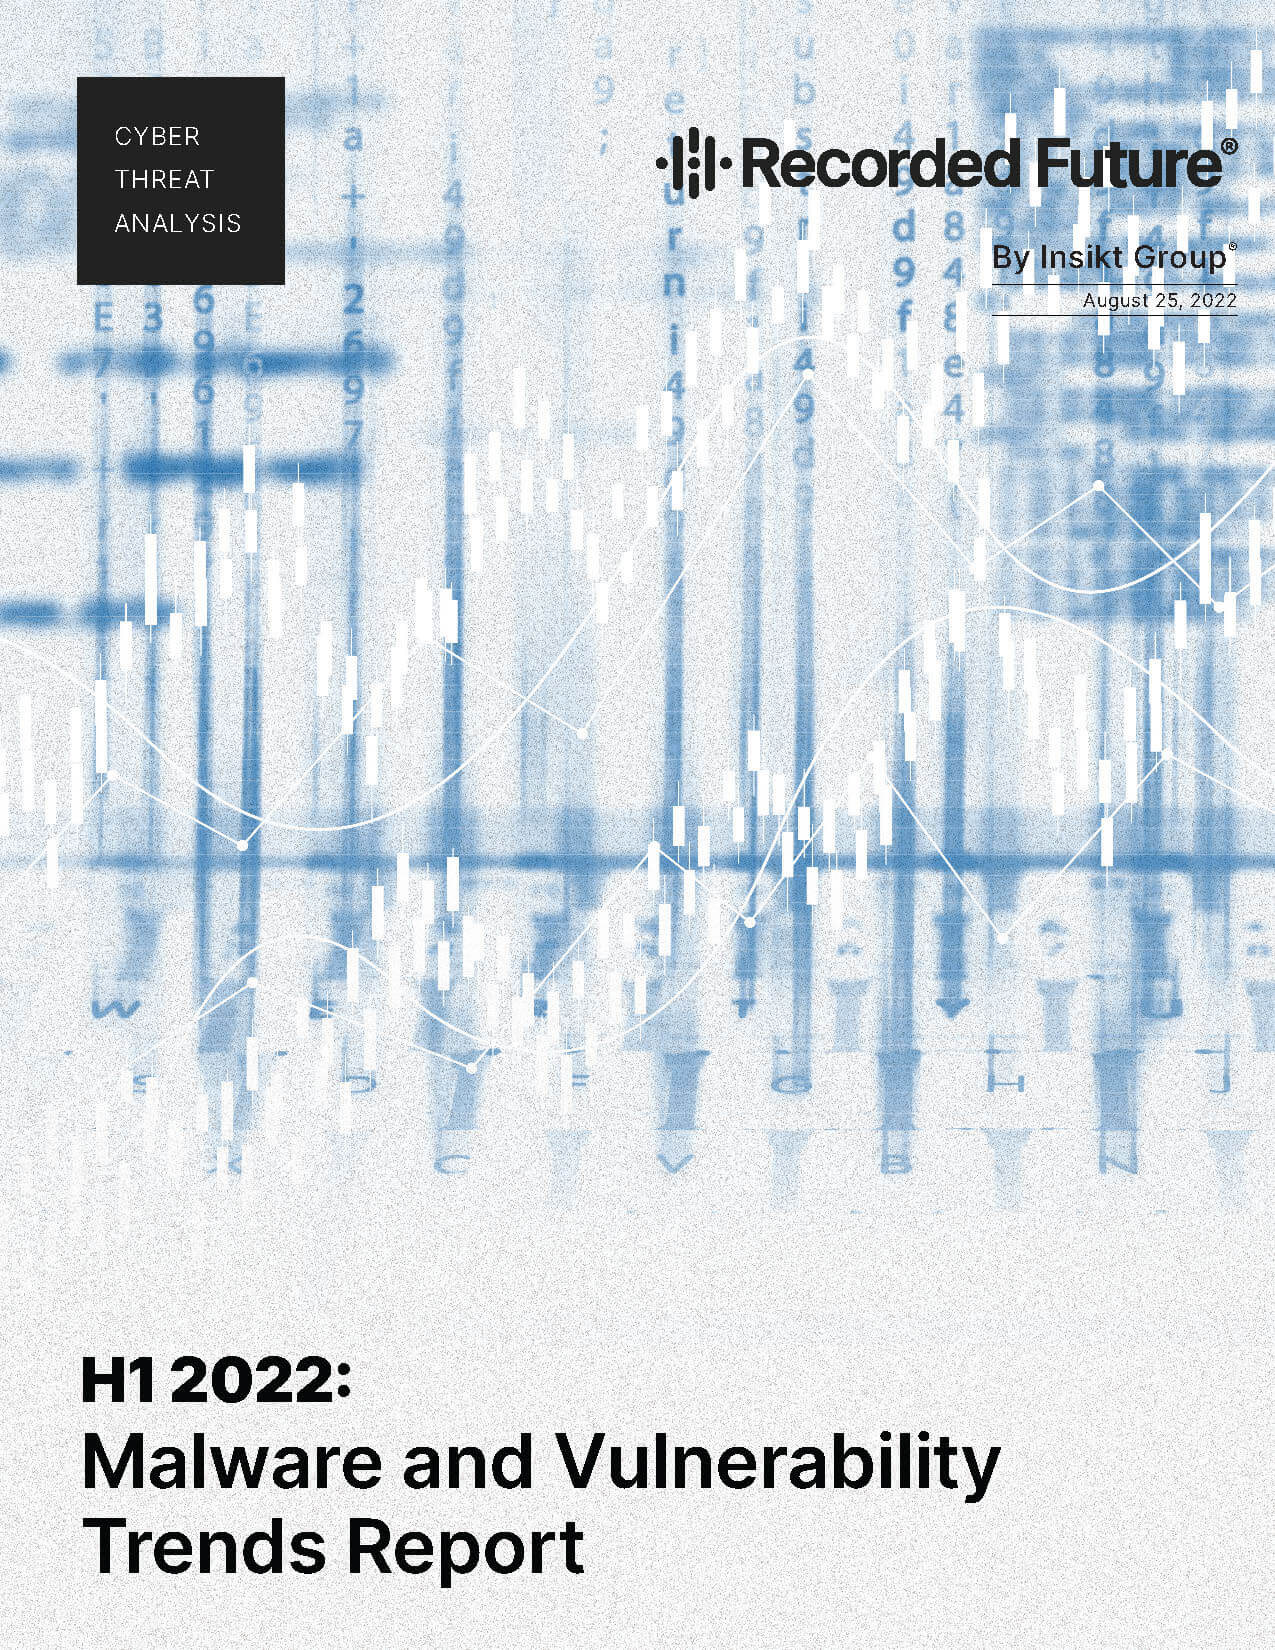 H1 2022: Malware and Vulnerability Trends Report